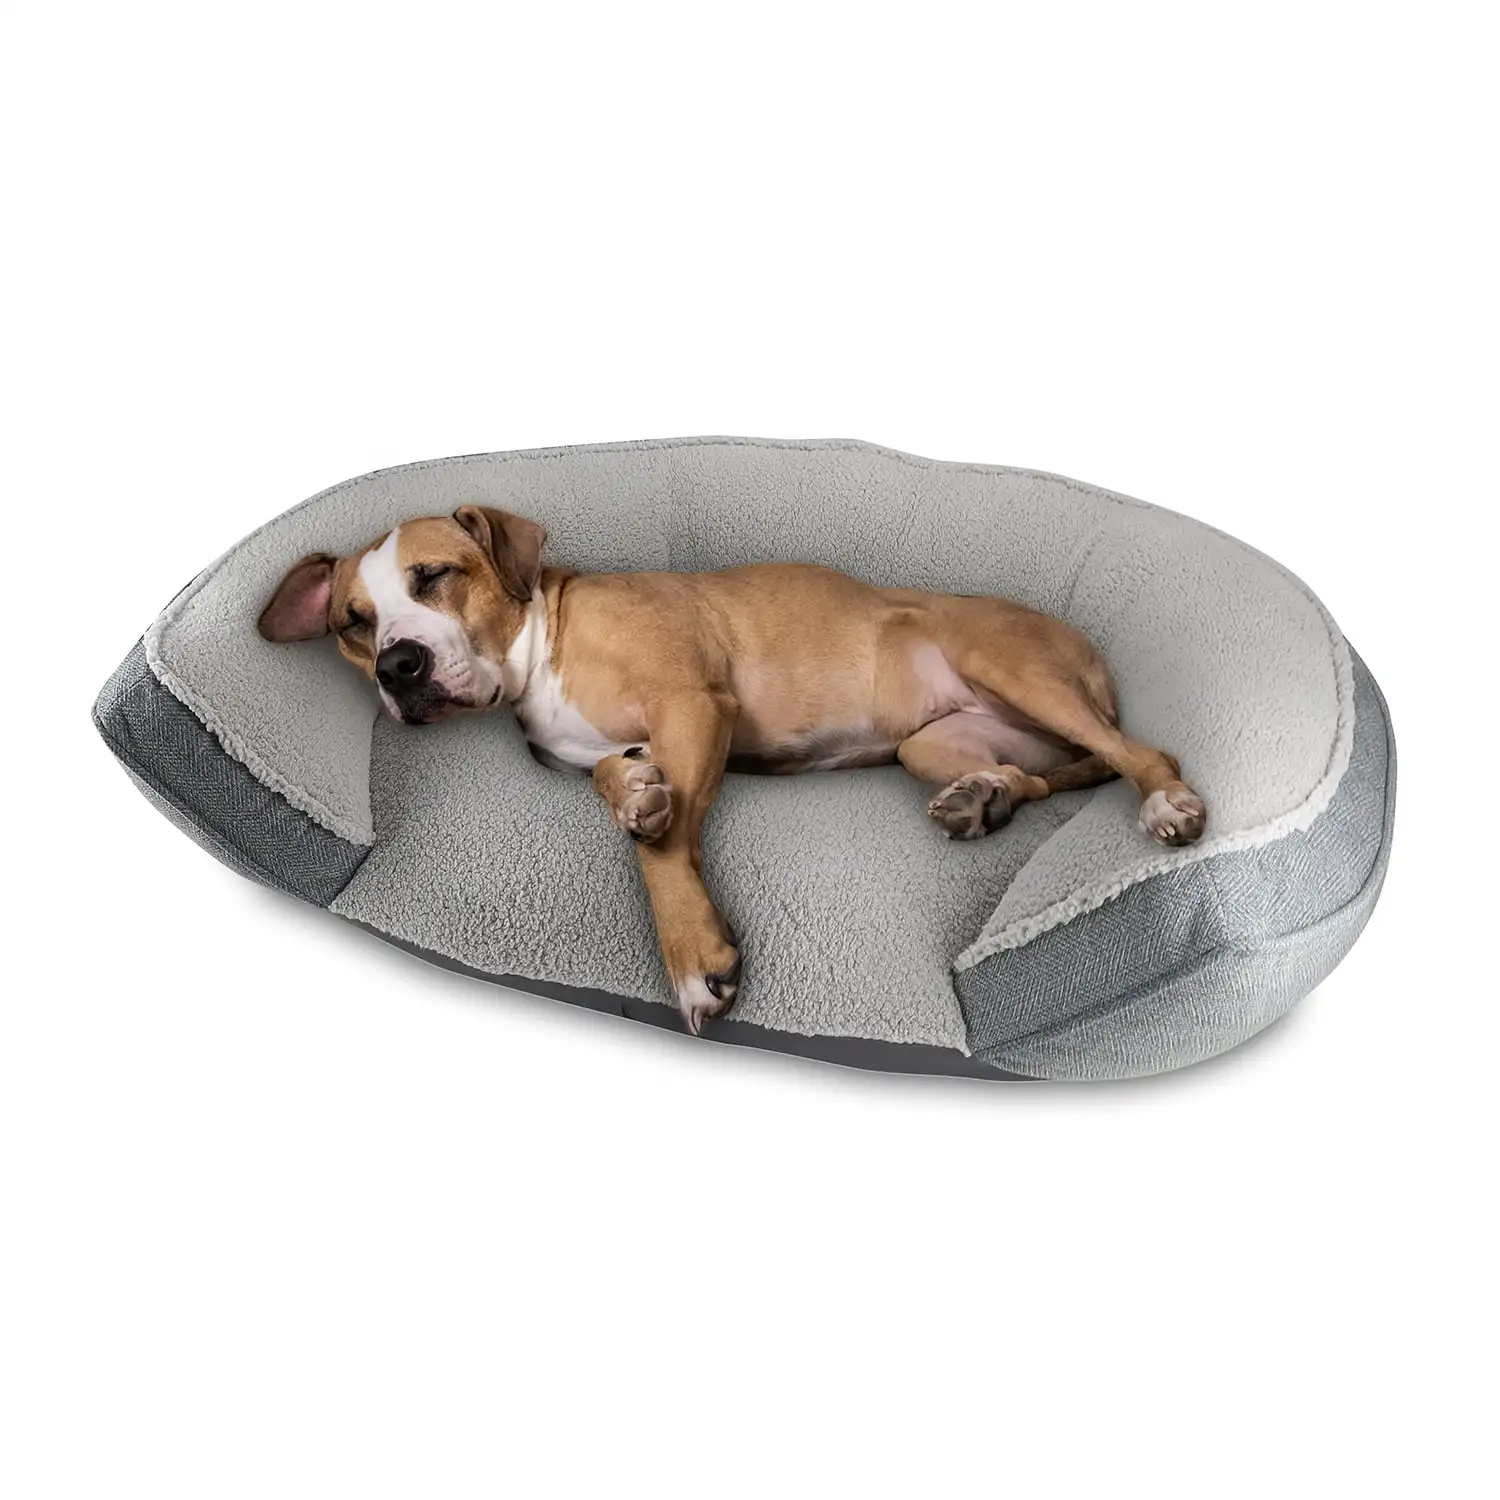 

HMTX Arlee Step In Oval Round Cuddler Pet Dog Bed - Memory Foam - Chew Resistant - Large/Extra Large (choose your color)